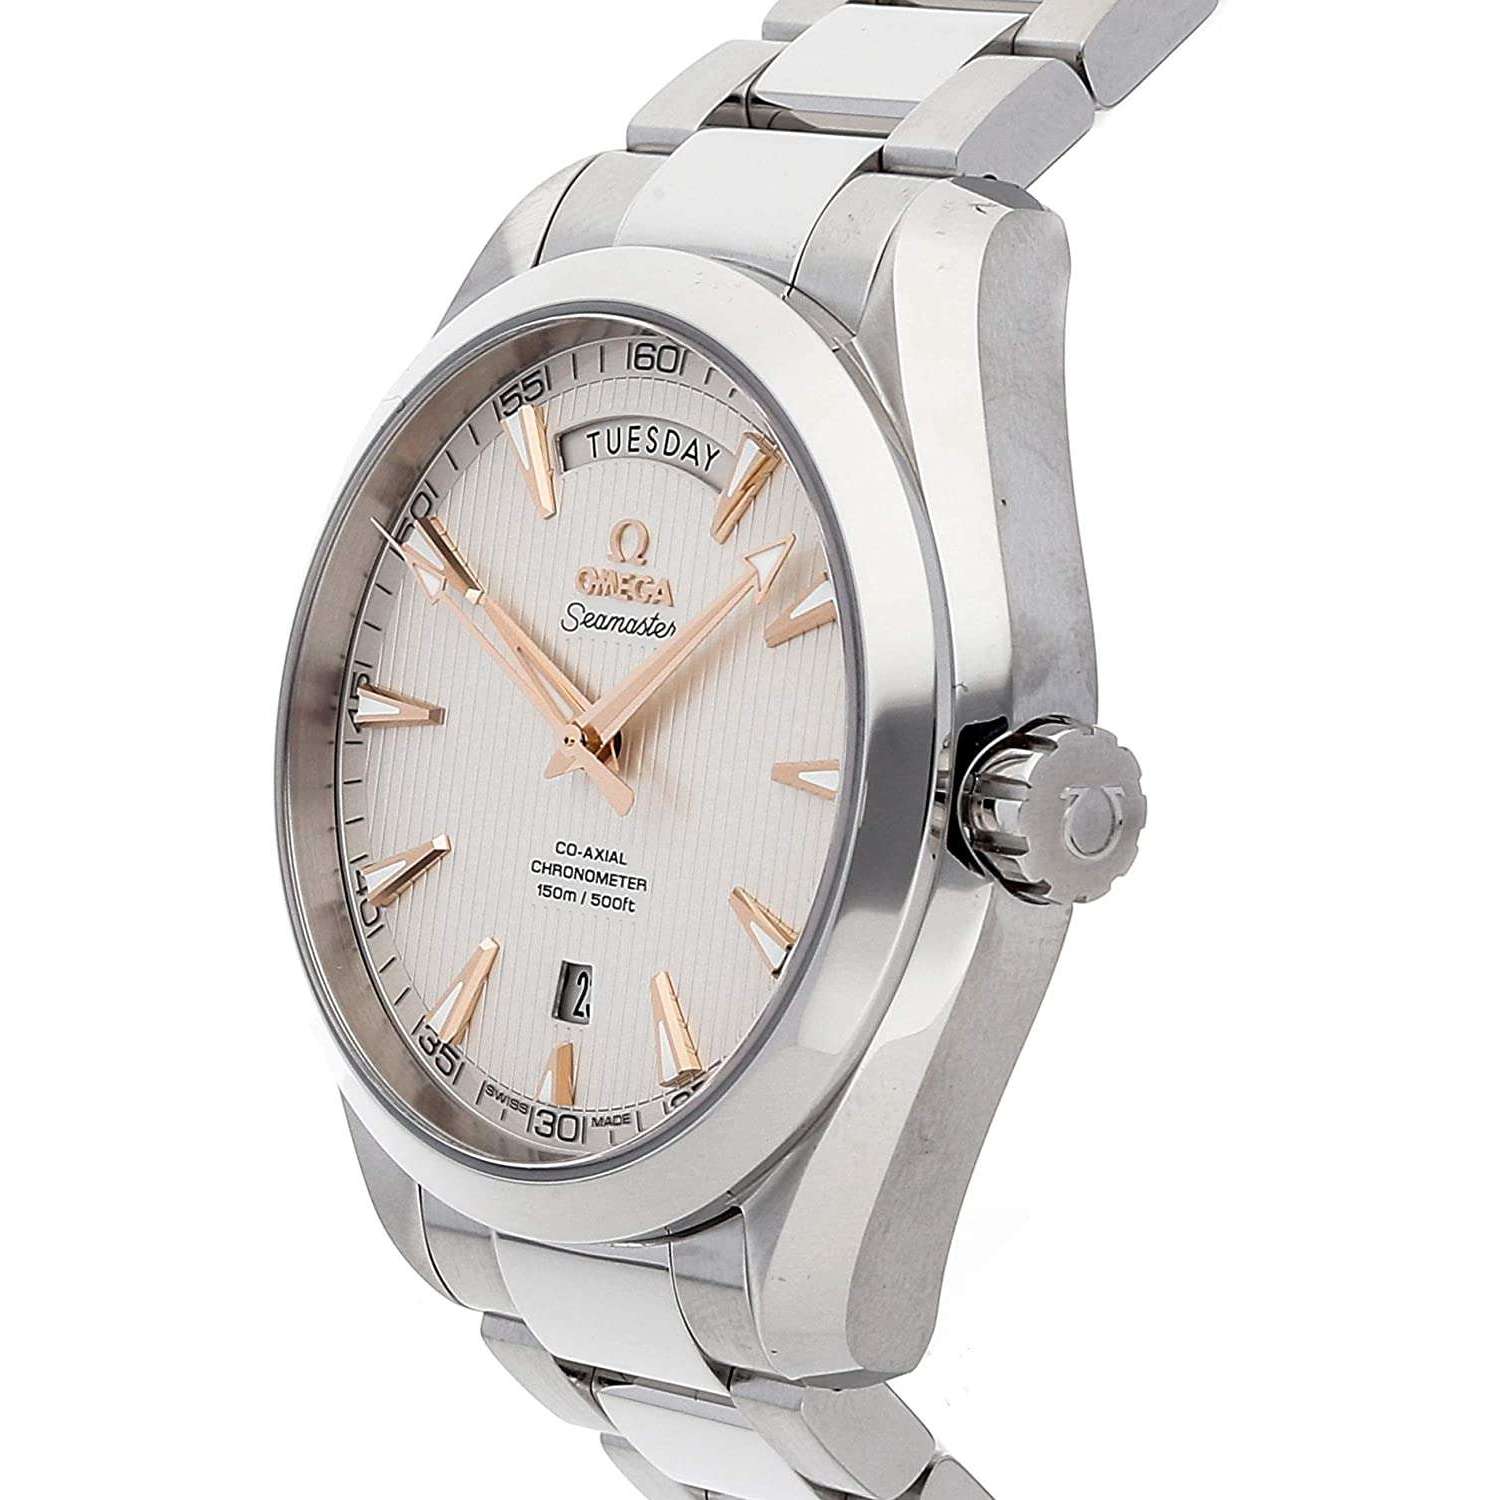 ROOK JAPAN:OMEGA SEAMASTER CO-AXIAL CHRONOMETER 41 MM MEN WATCH 231.10.42.22.02.001,Luxury Watch,Omega